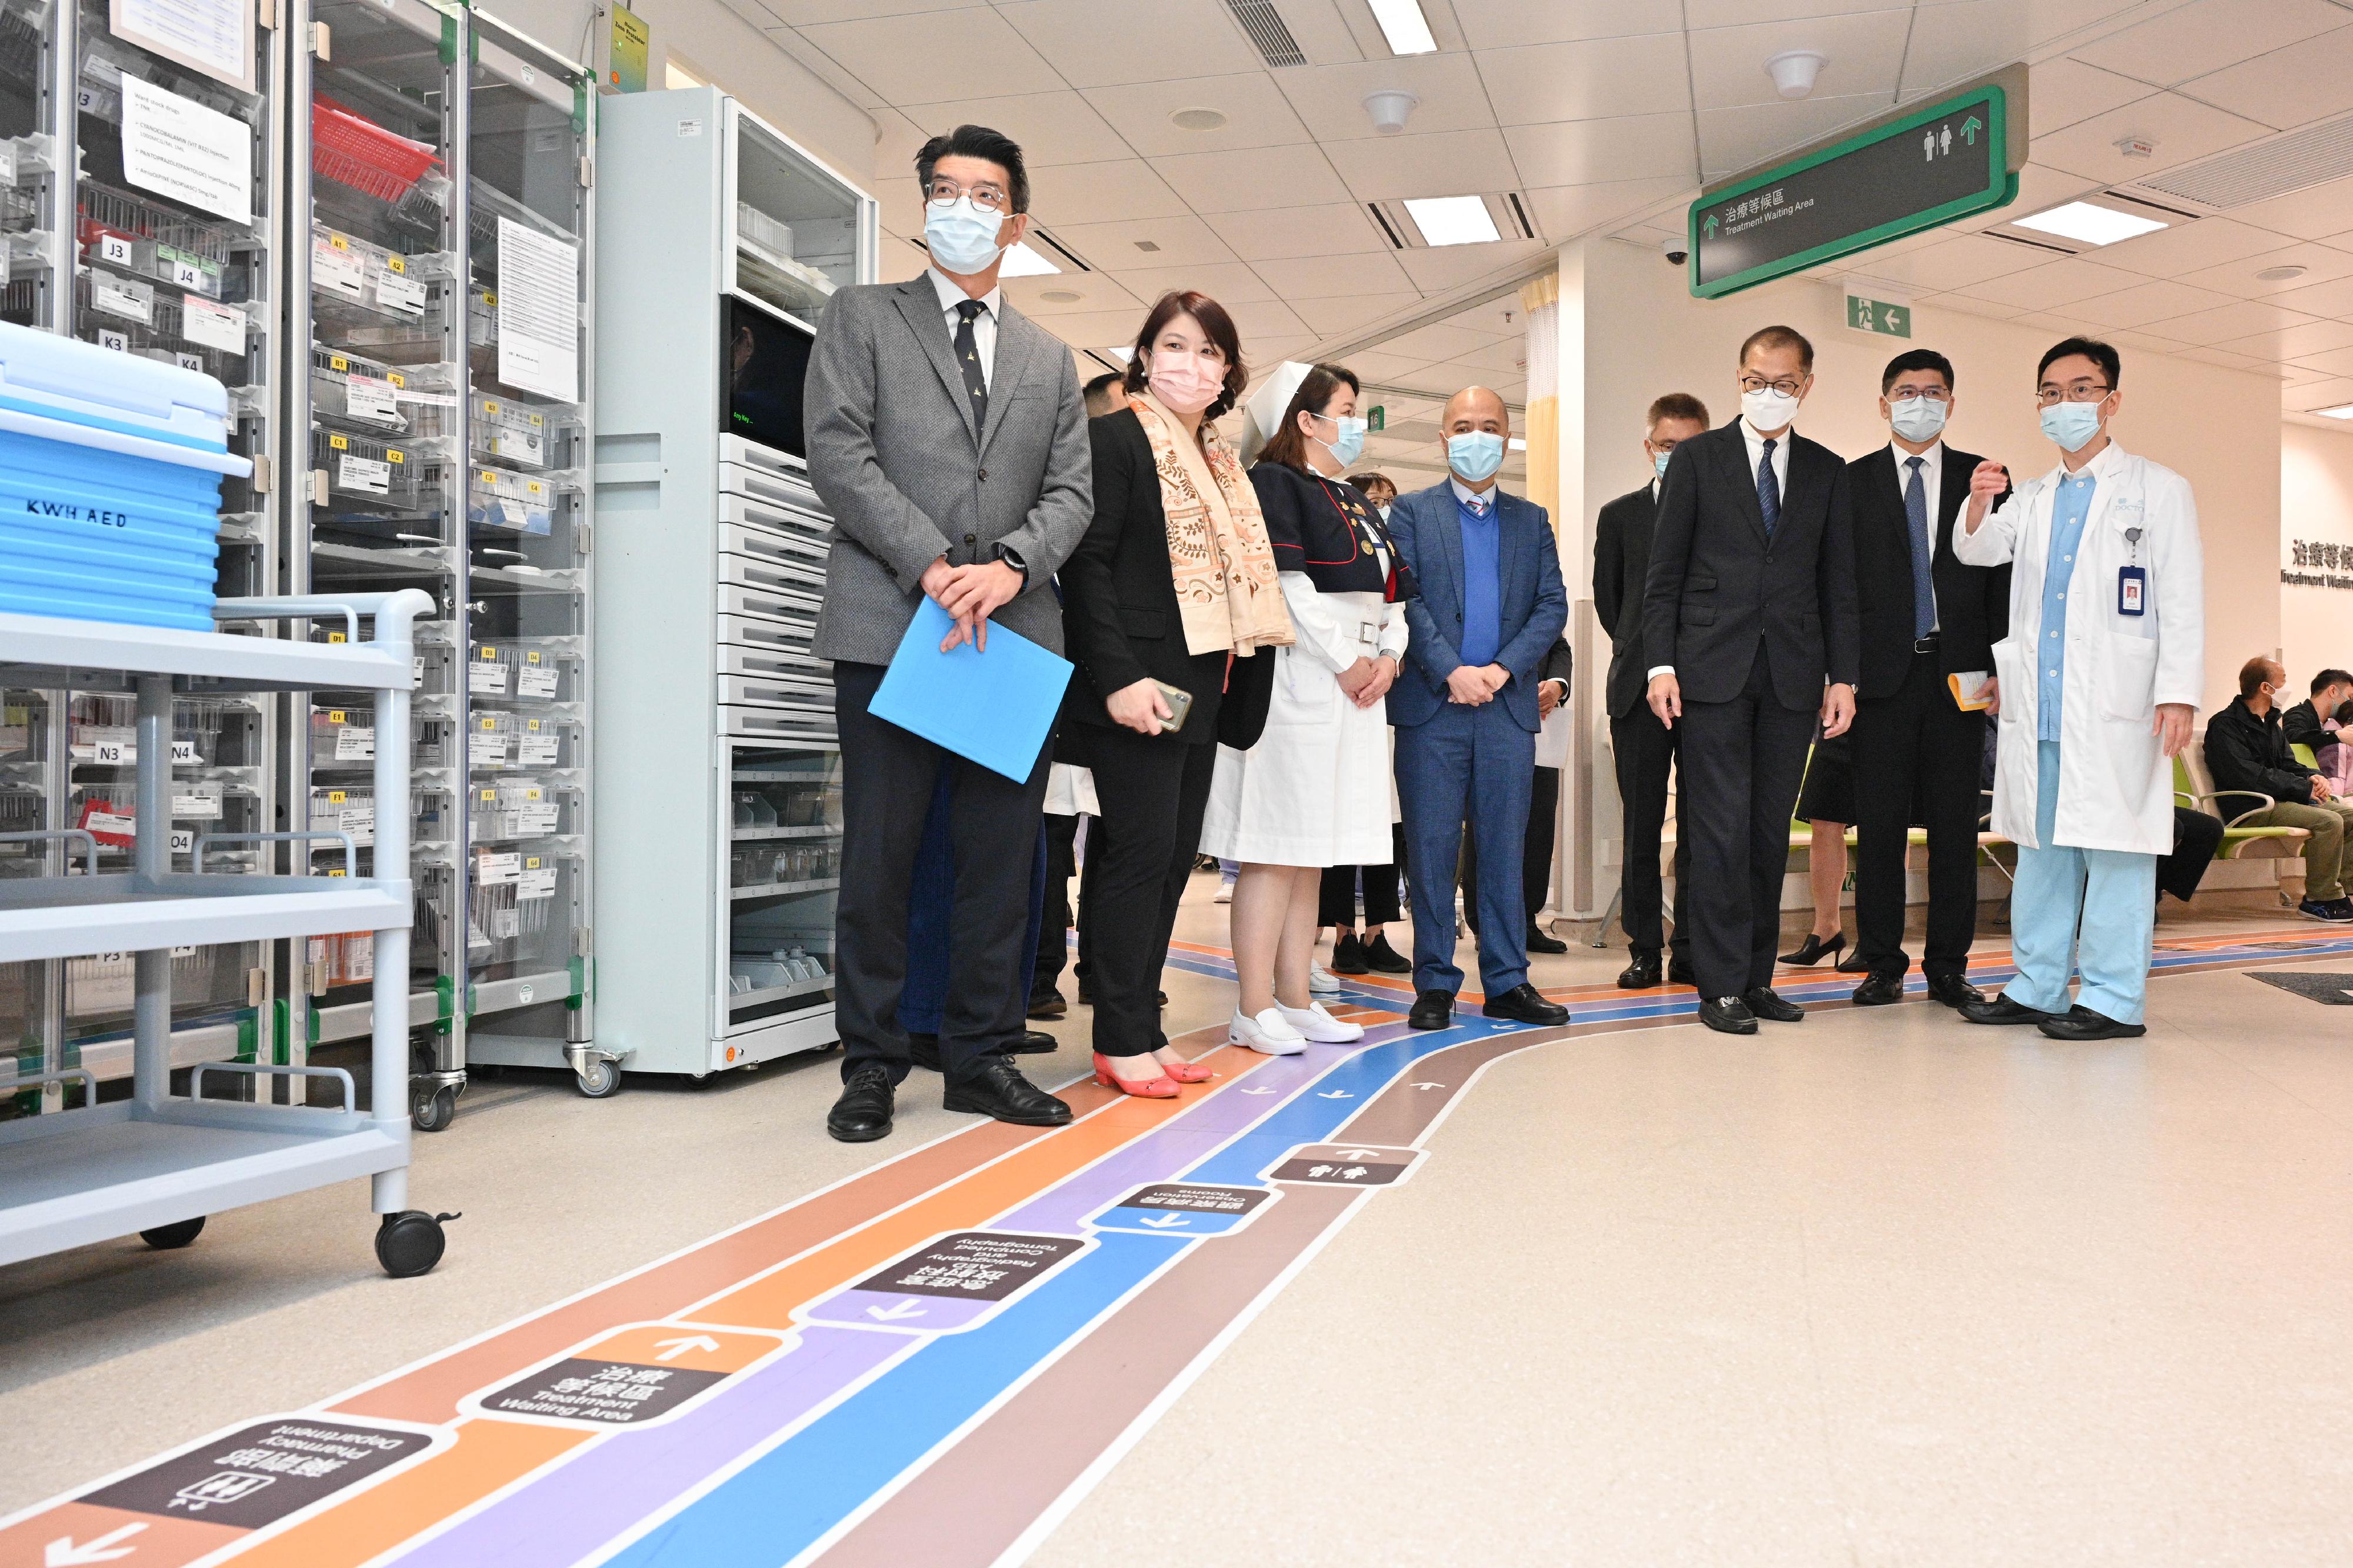 The Secretary for Health, Professor Lo Chung-mau (third right), inspects the Accident and Emergency Department of Kwong Wah Hospital in the company of the Under Secretary for Health, Dr Libby Lee (second left); the Commissioner for Primary Healthcare, Dr Pang Fei-chau (first left); and the Chief Executive of the Hospital Authority, Dr Tony Ko (second right), this morning (February 6).